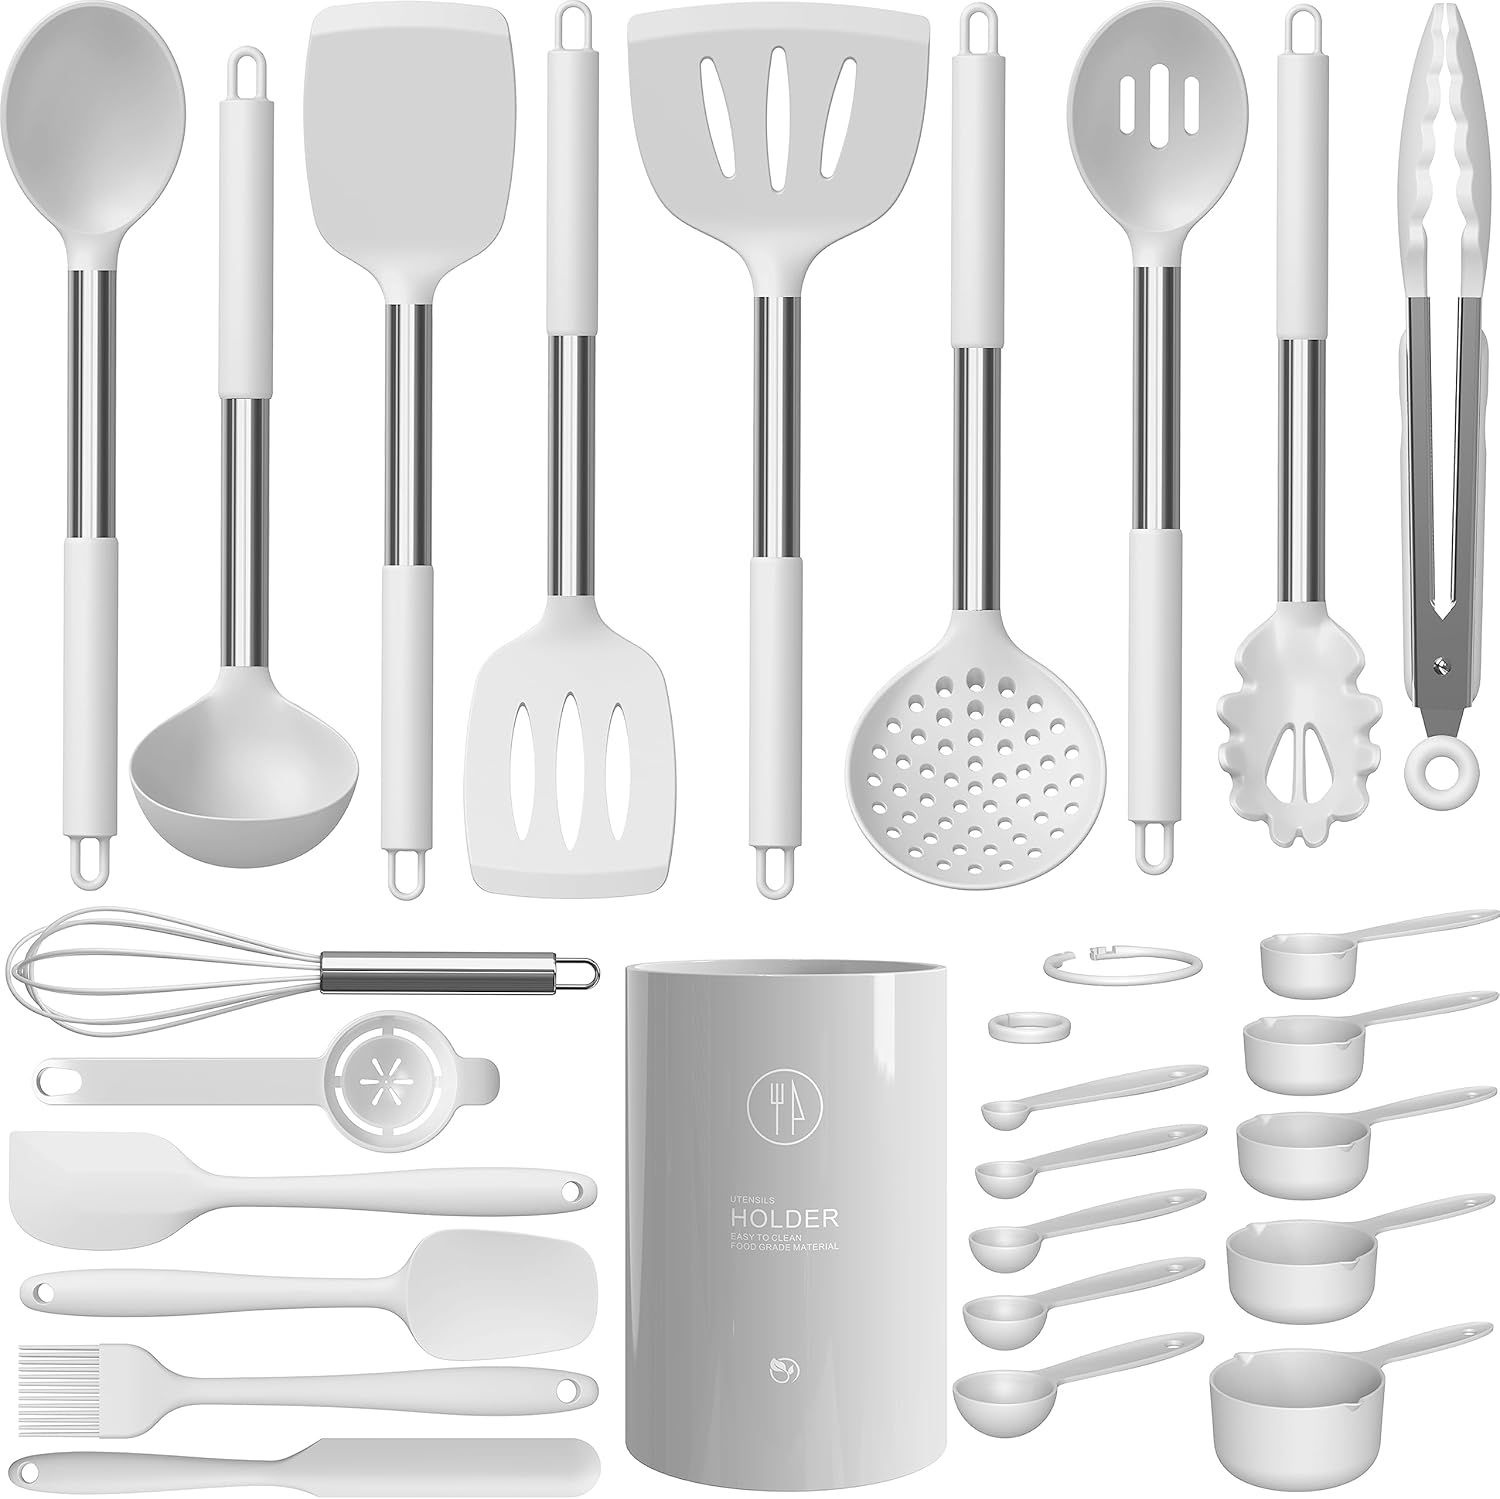 Large Silicone Cooking Utensils Set - Heat Resistant Kitchen Utensils Sets,Spatula,Spoon,Turner T... | Amazon (US)